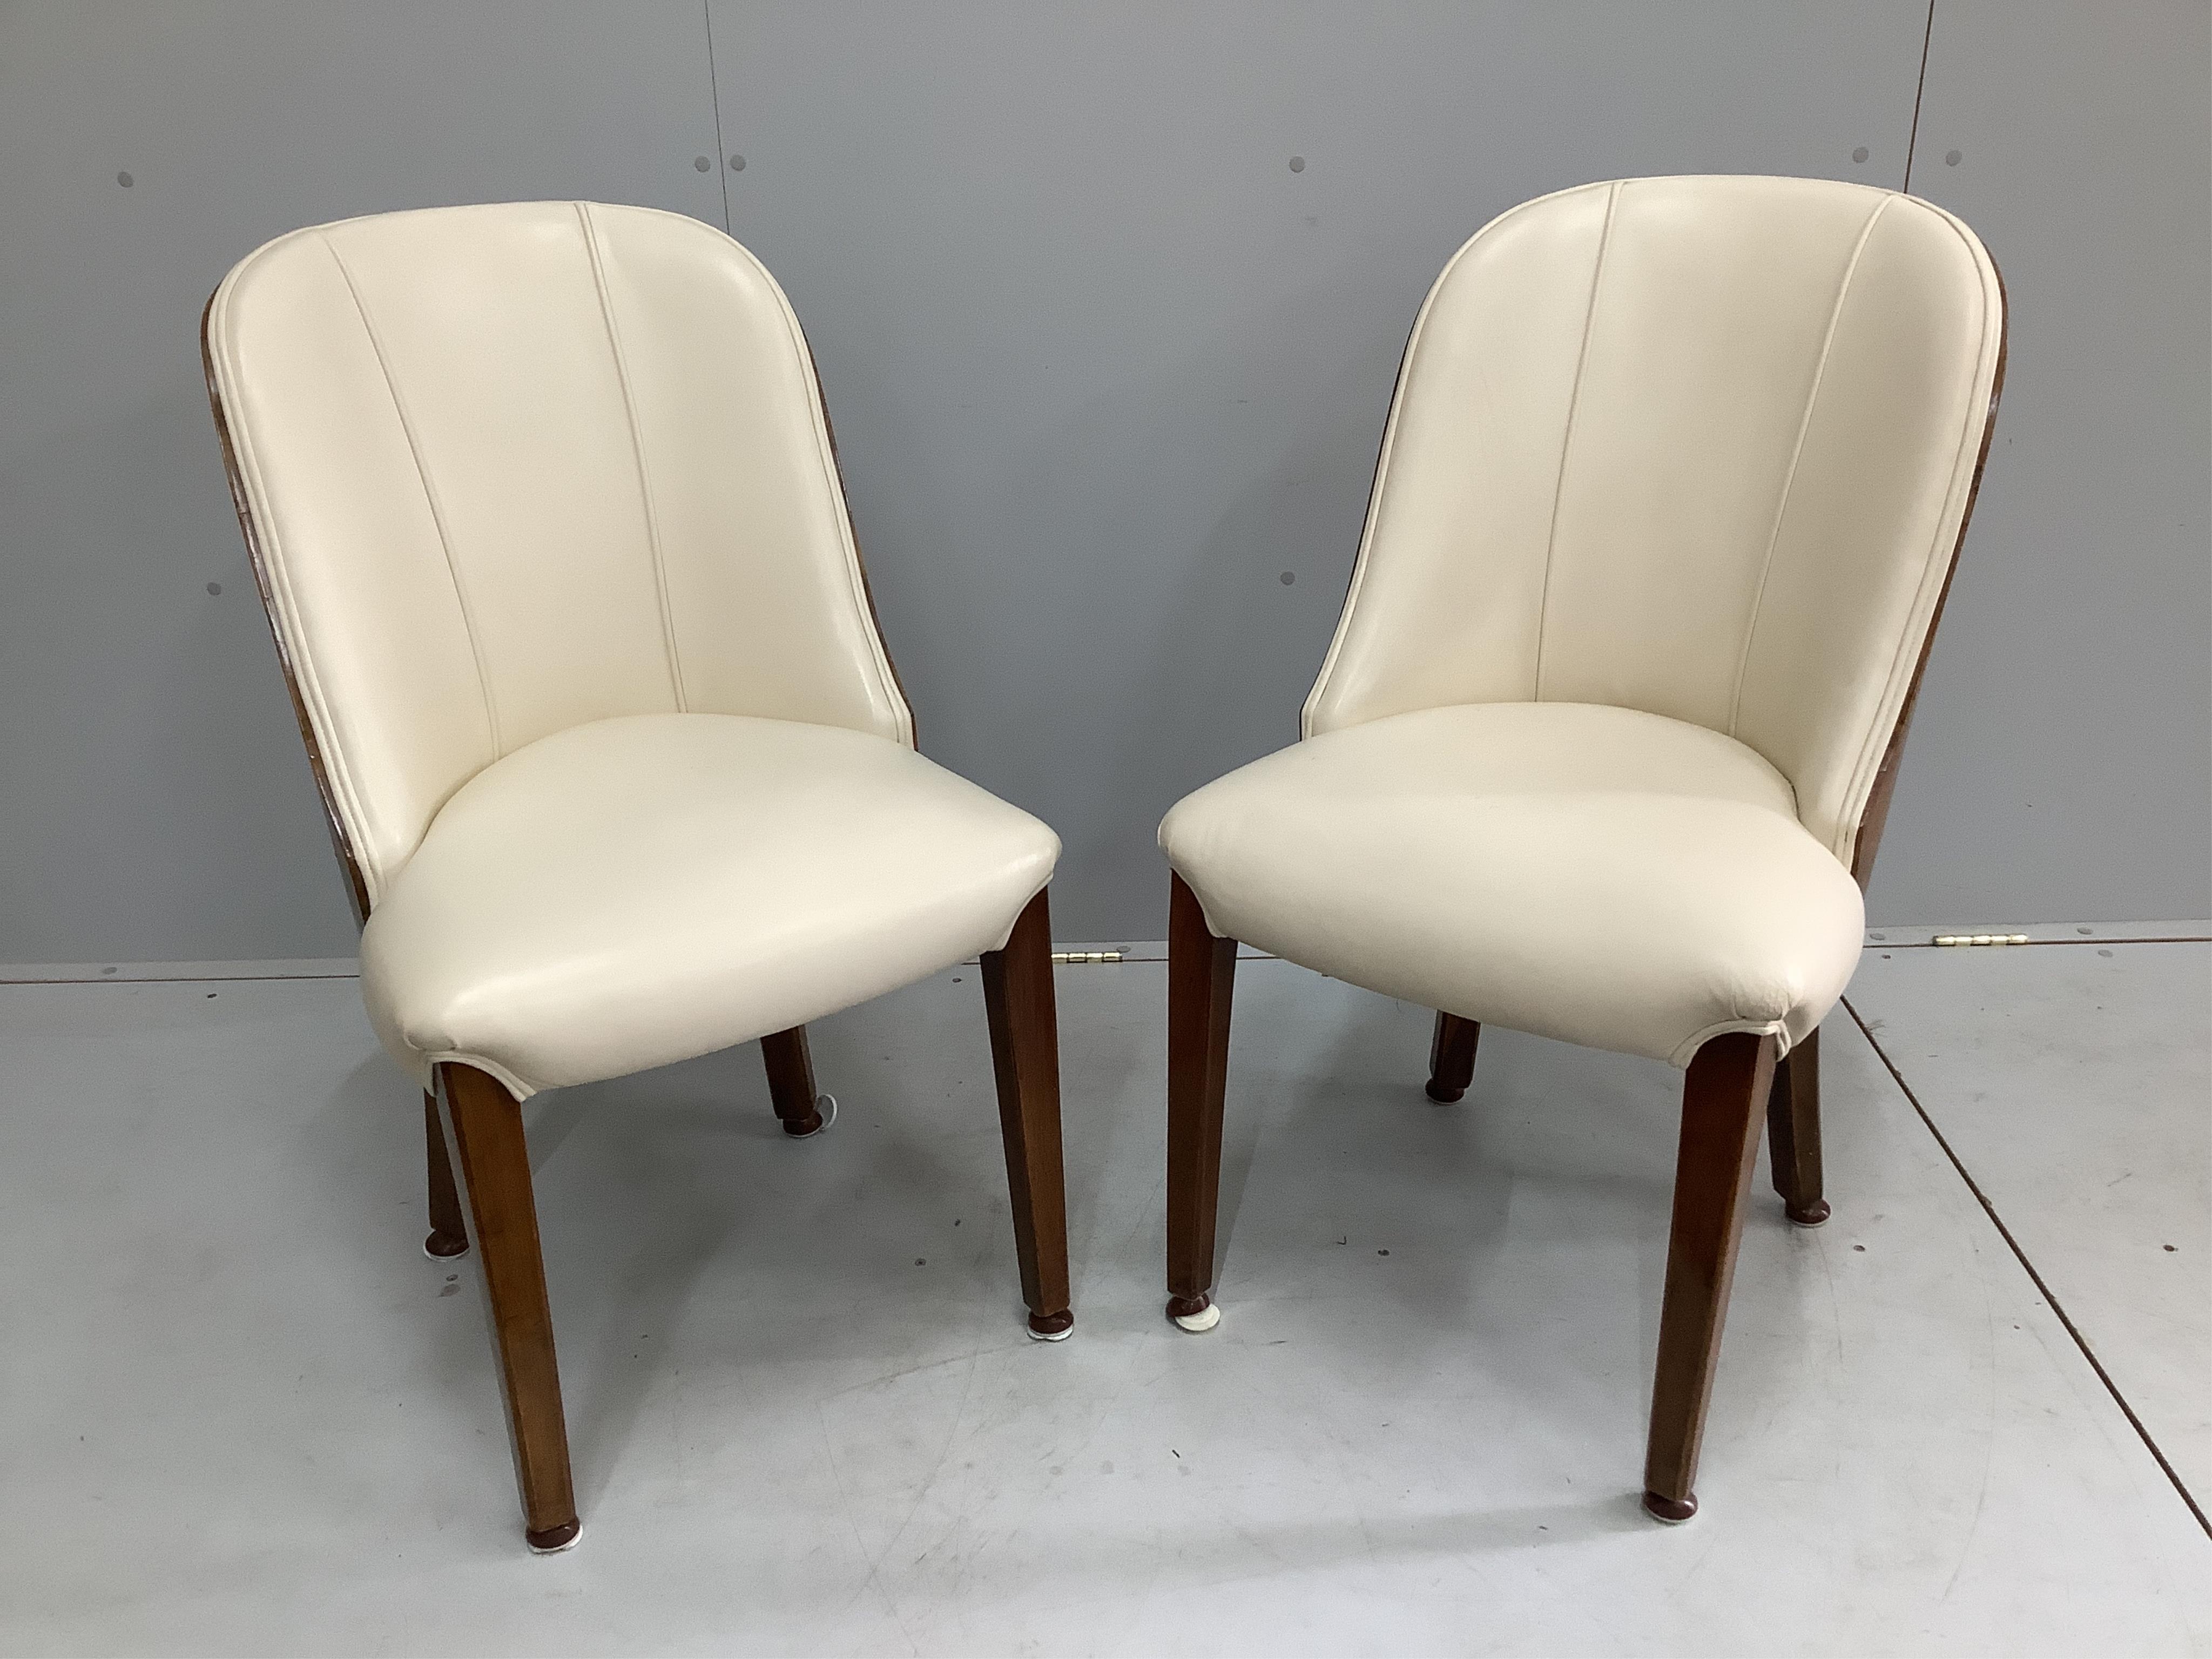 A pair of Art Deco burr walnut and ivory leather chairs                                                                                                                                                                     